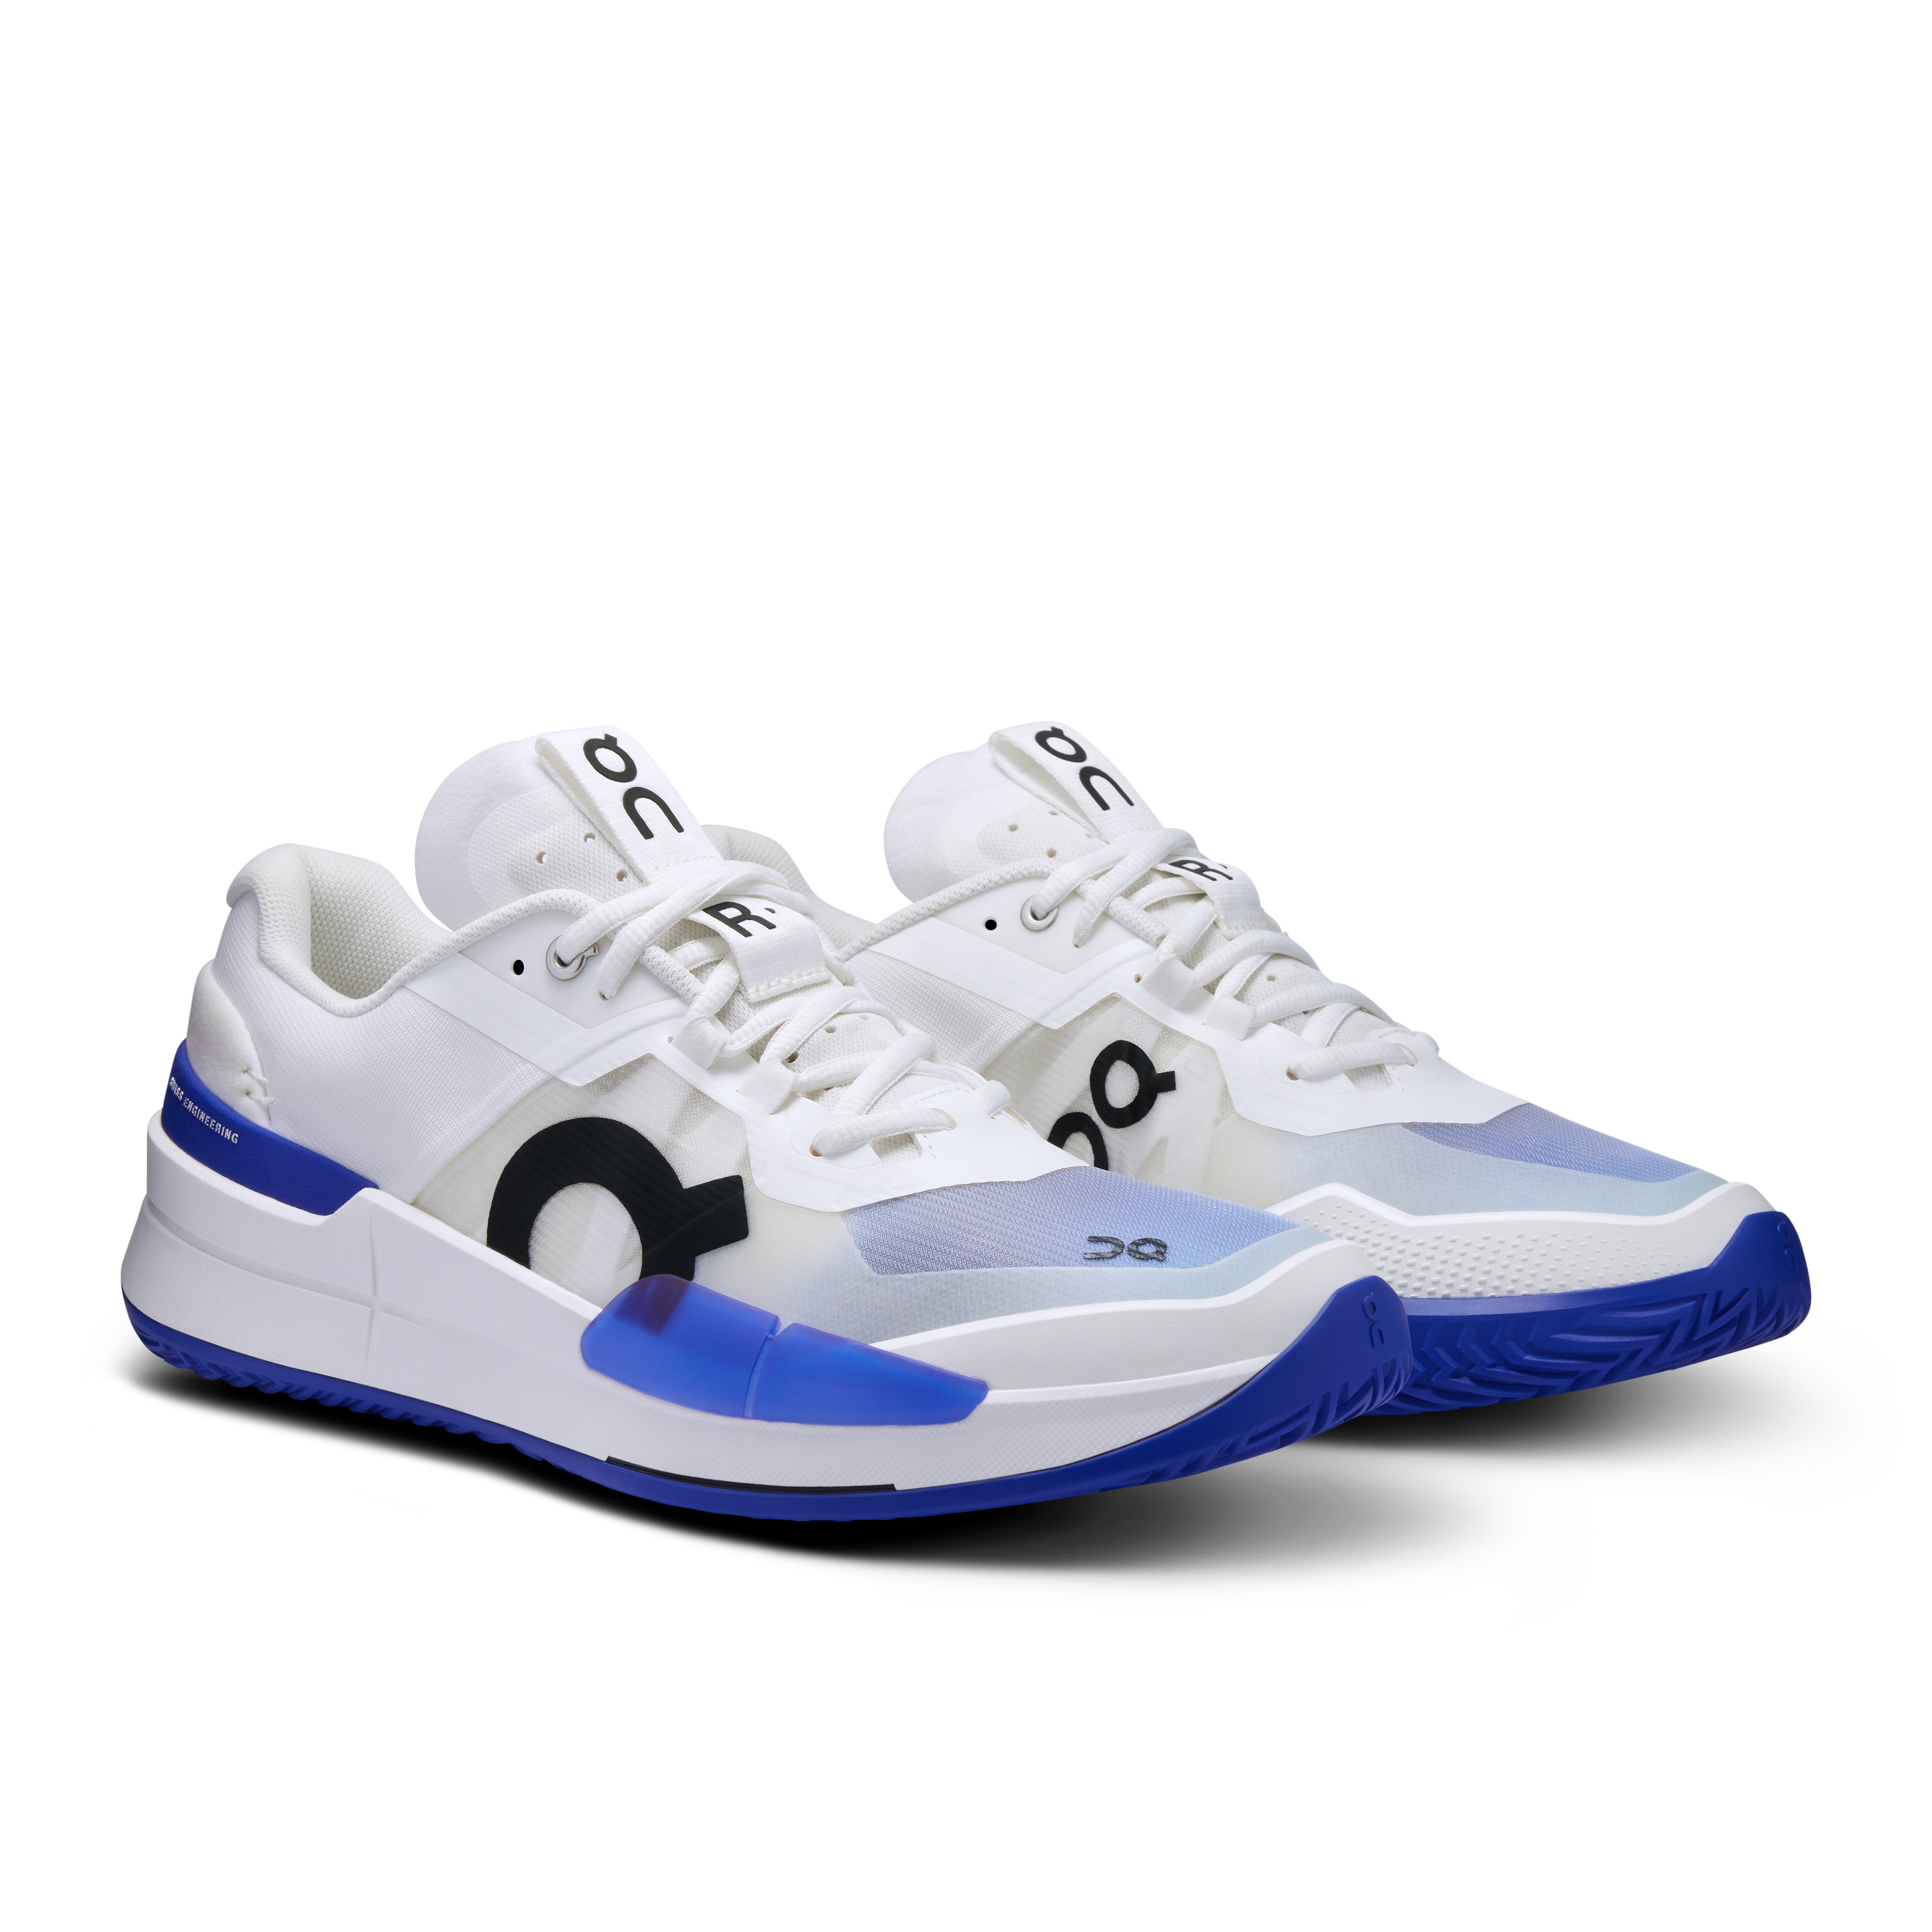 THE ROGER Pro 2: Men's Competition-Grade Tennis Shoe | On | On 日本